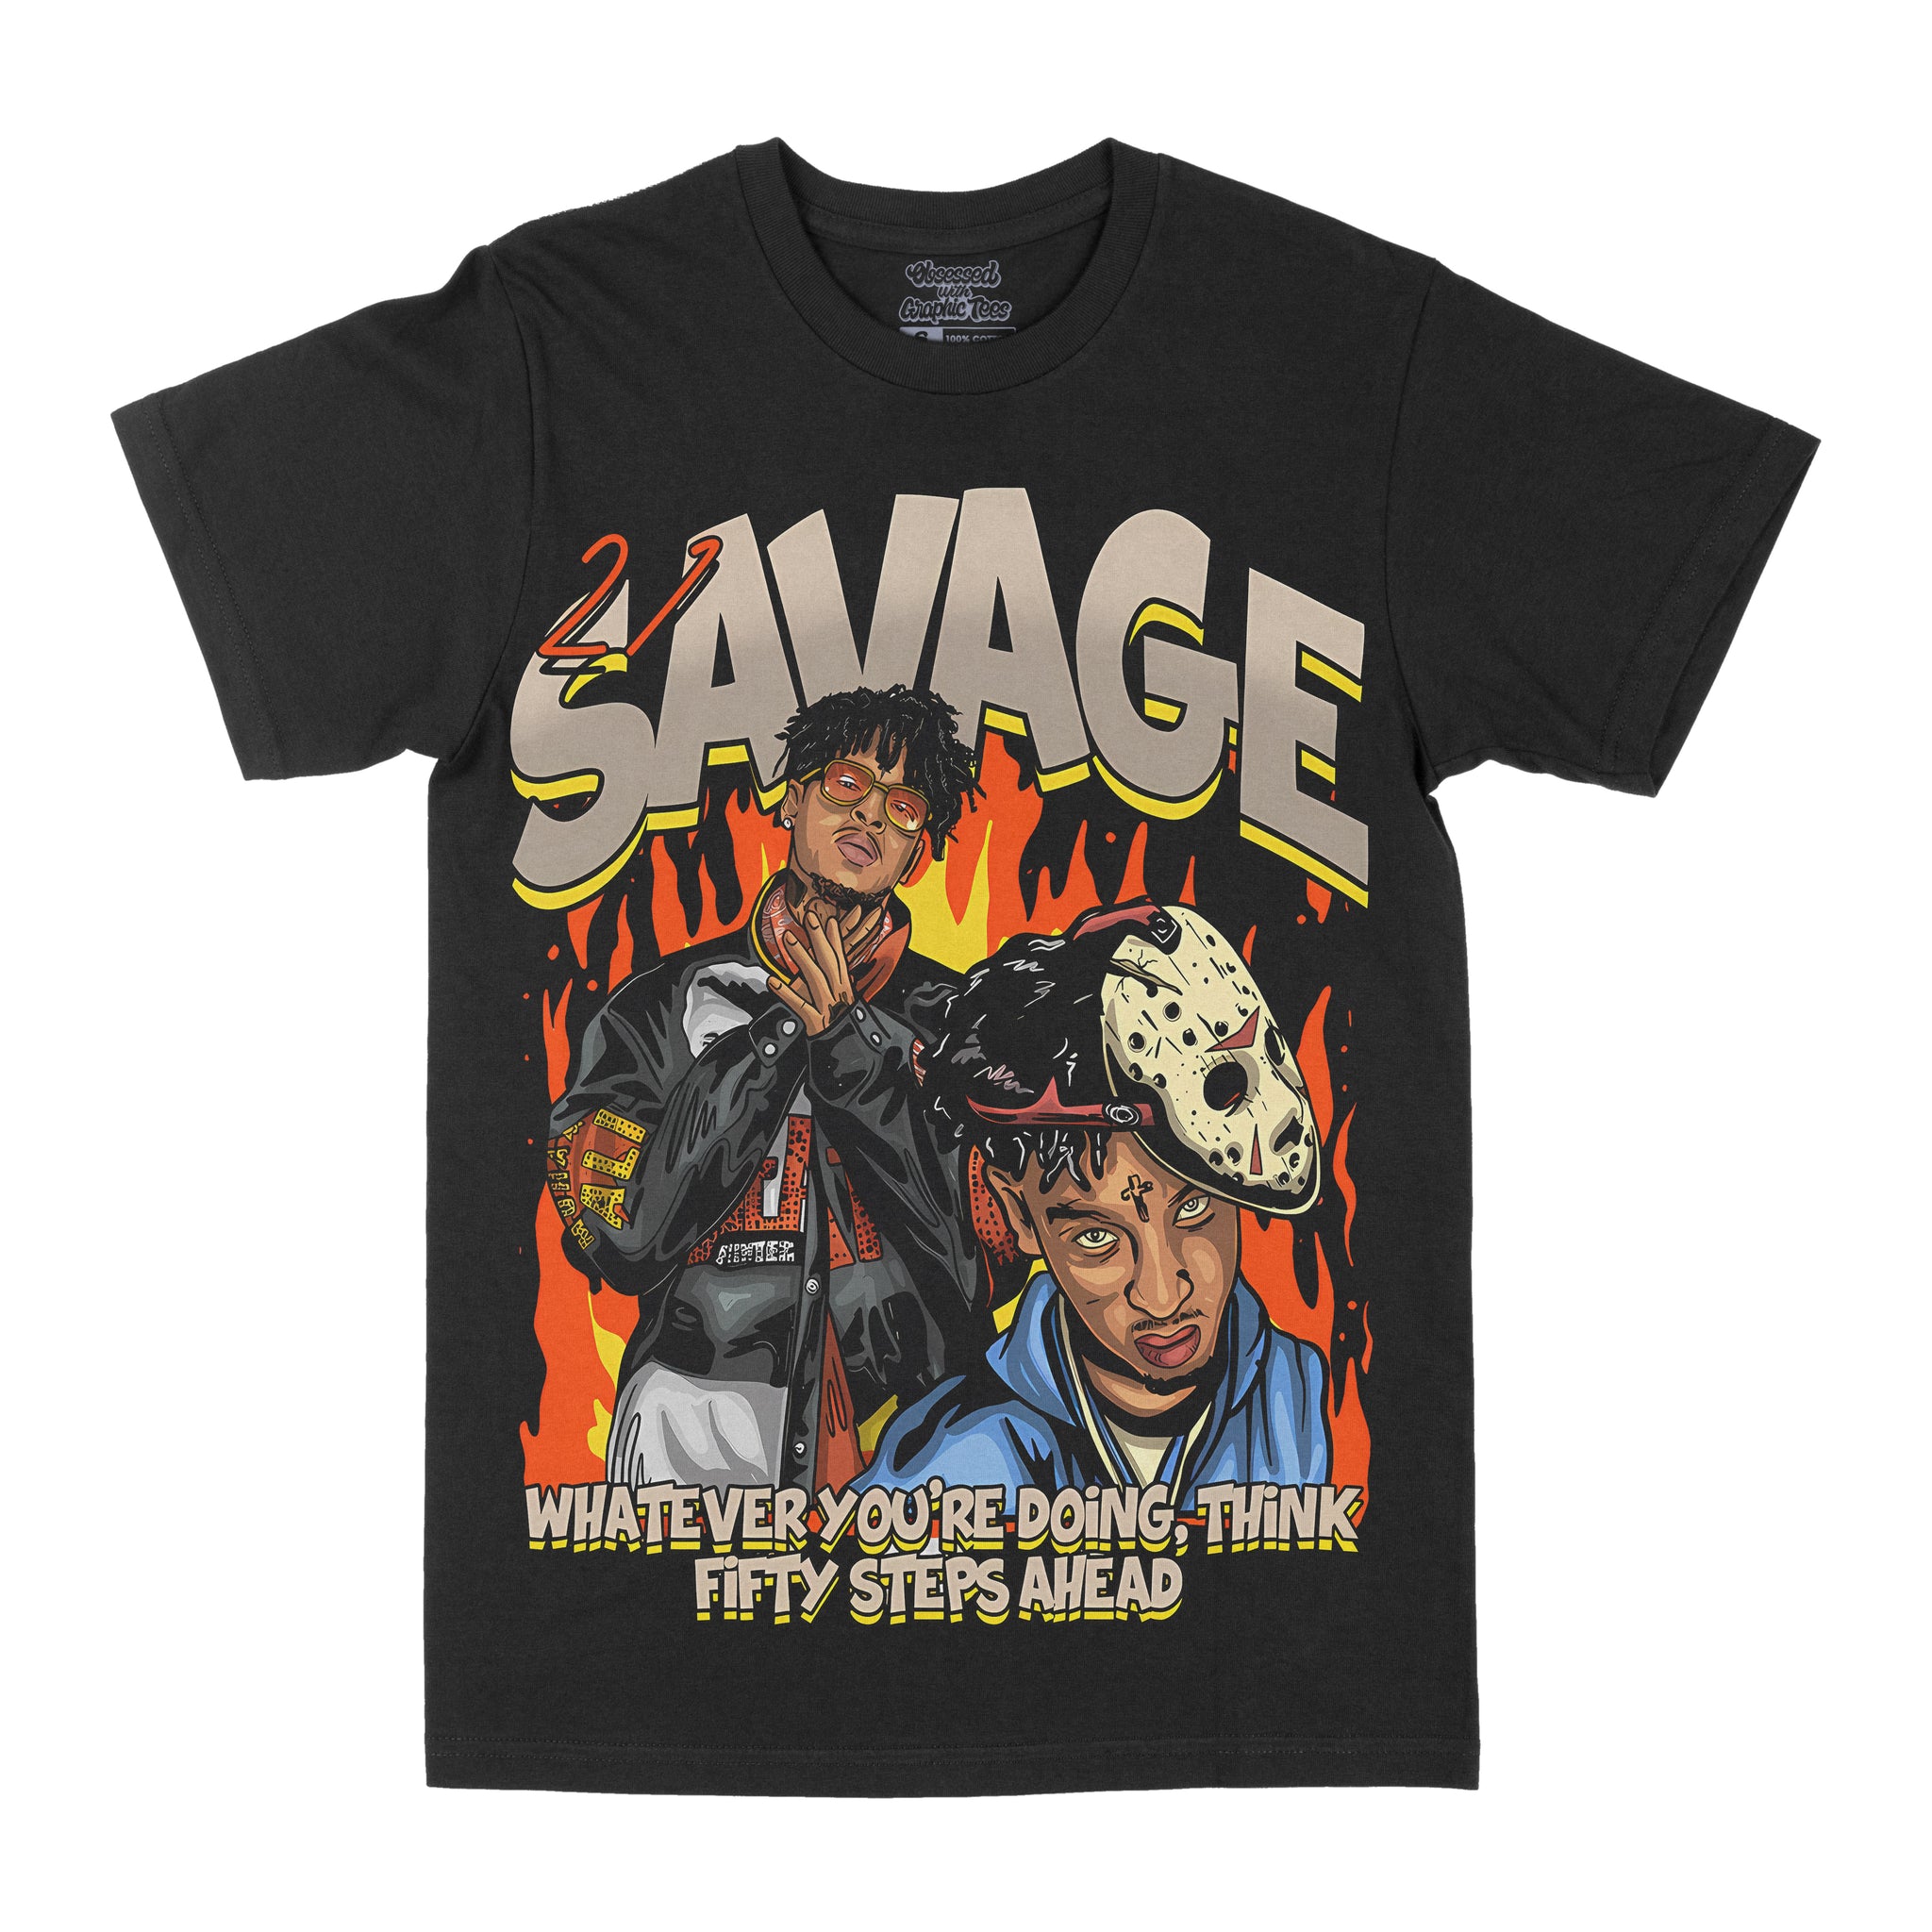 21 Savage "Fifty Steps" Graphic Tee